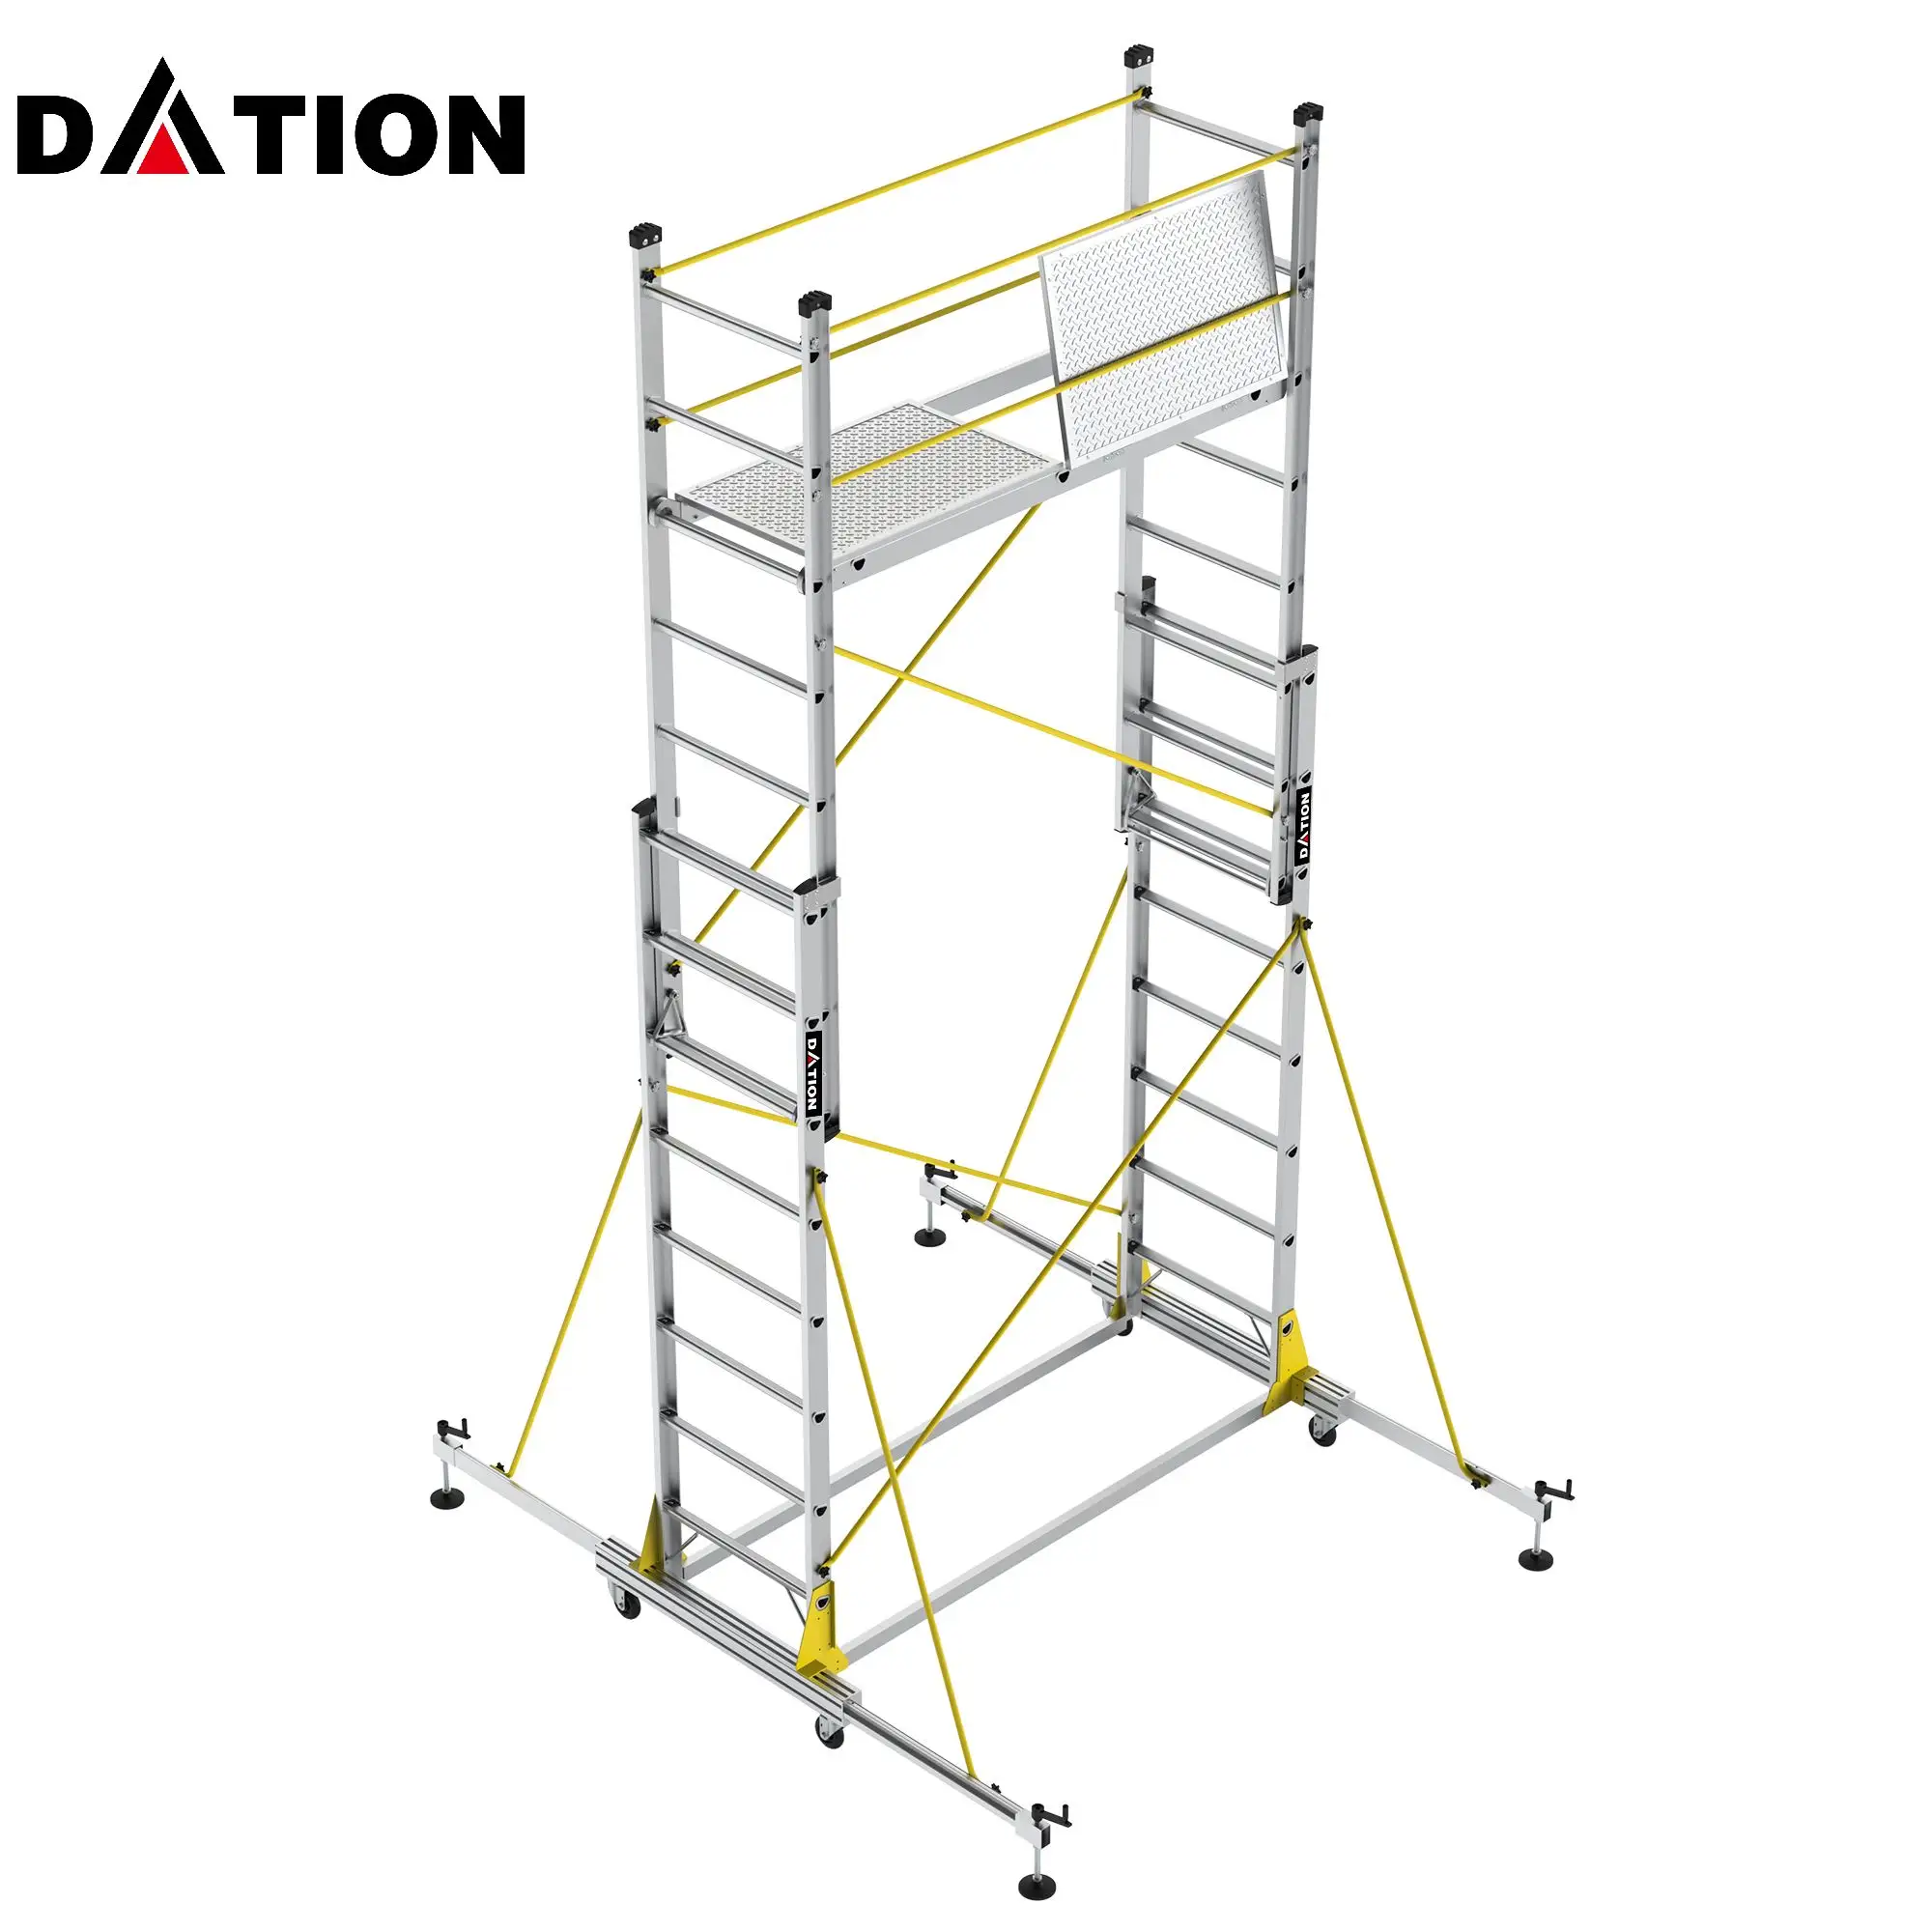 Dation Aluminum Alloy Rolling Platform Step Movable Warehouse Ladders Heavy Duty Scaffold Ladder